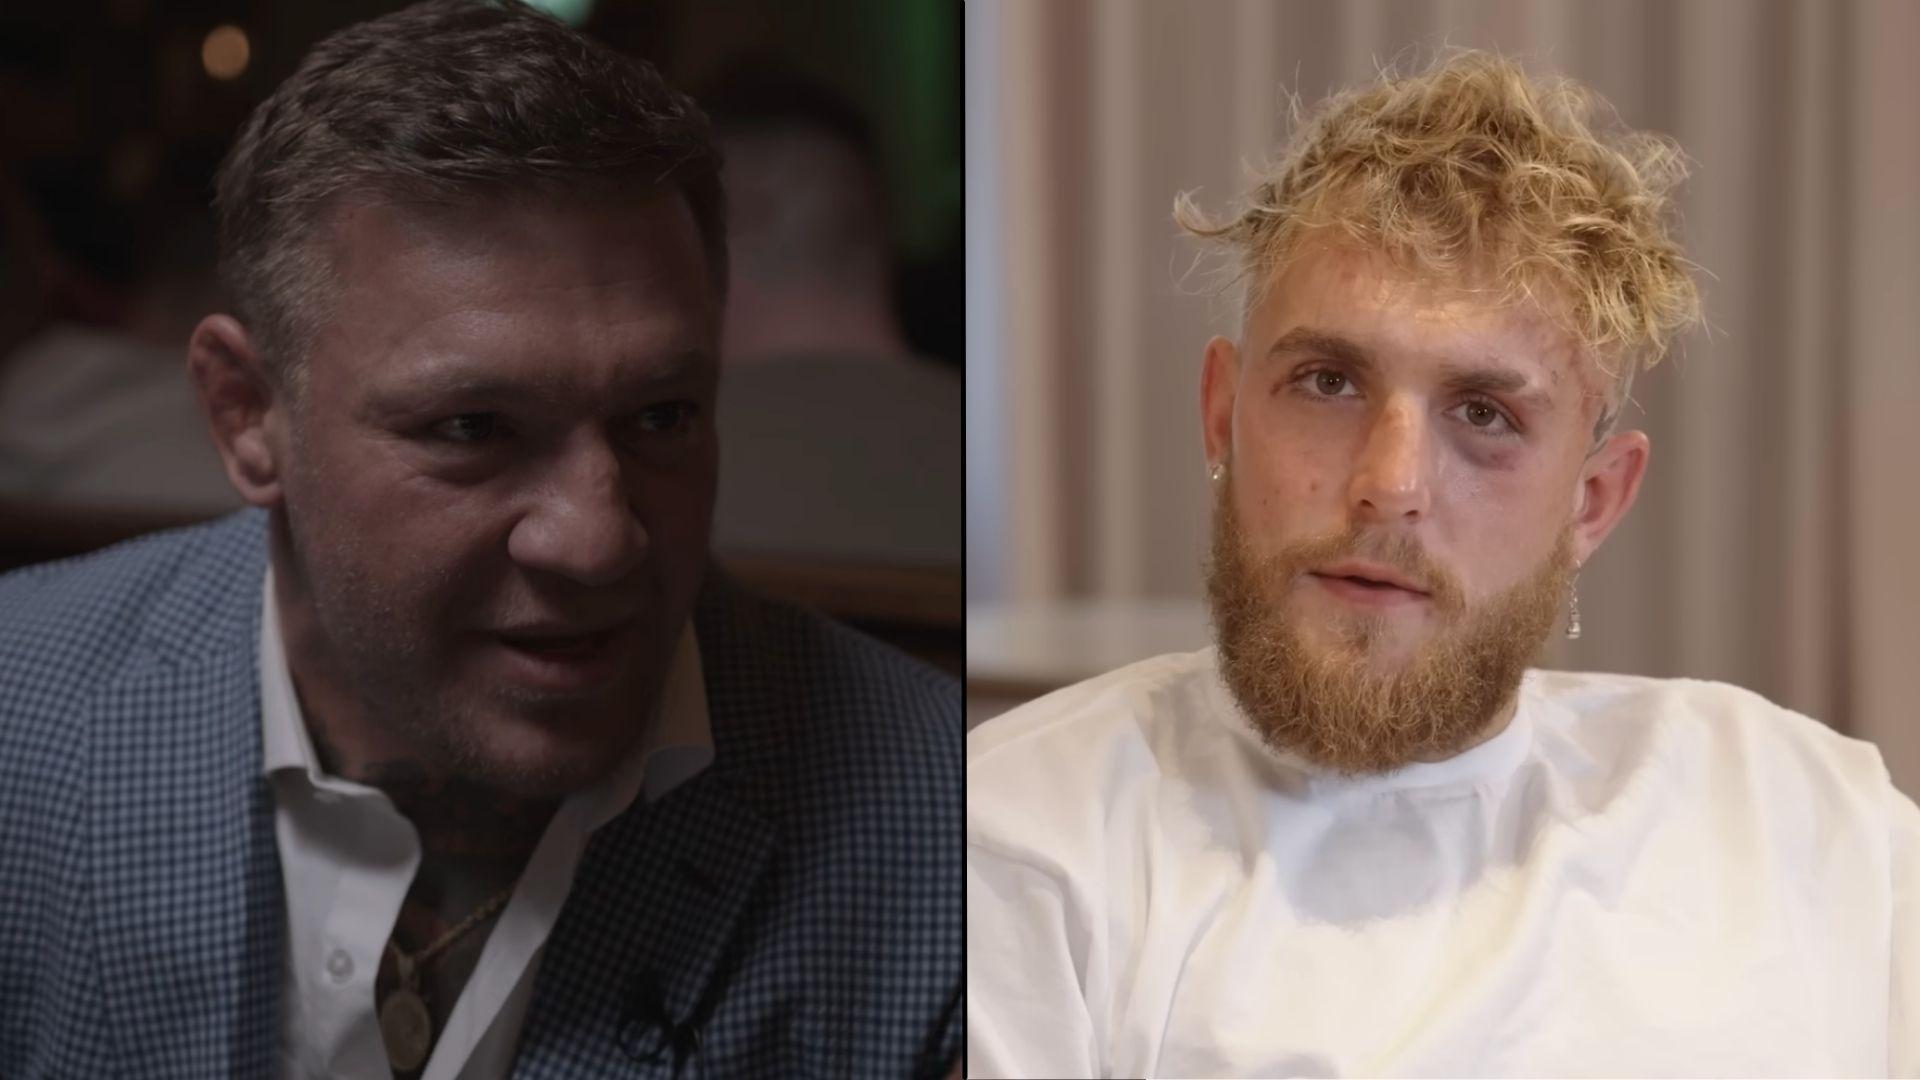 Jake Paul and conor mcgregor side by side talking to cameras